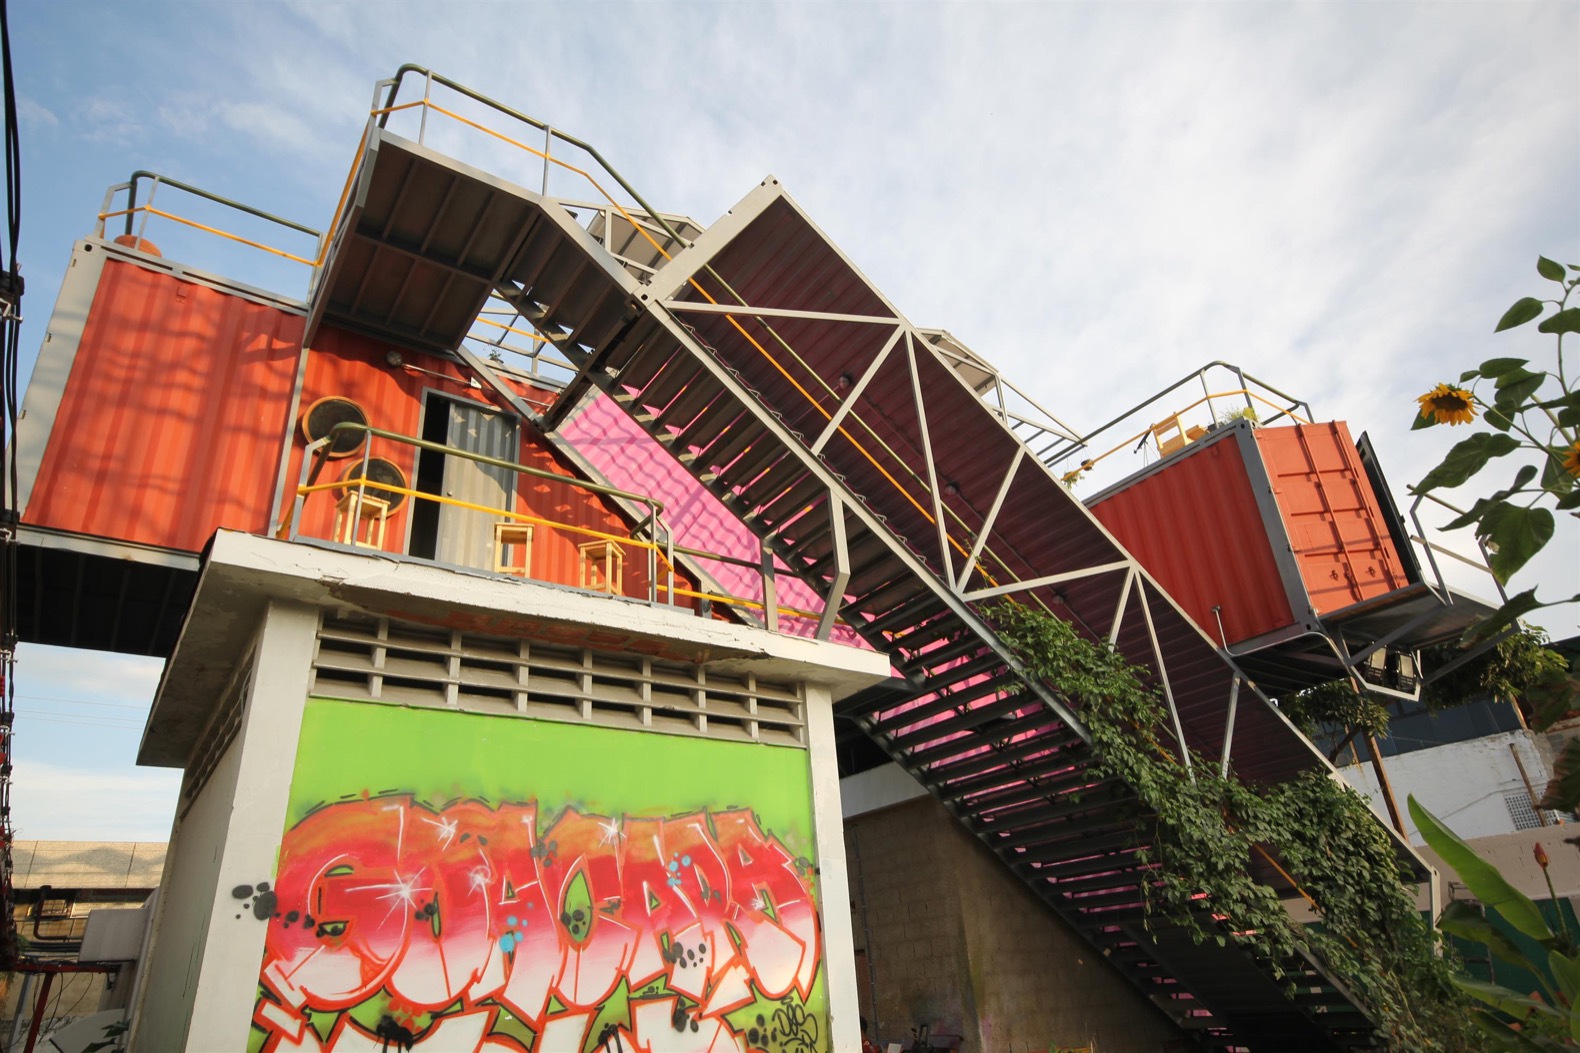 Colorful shipping container building with graffiti and staircase.